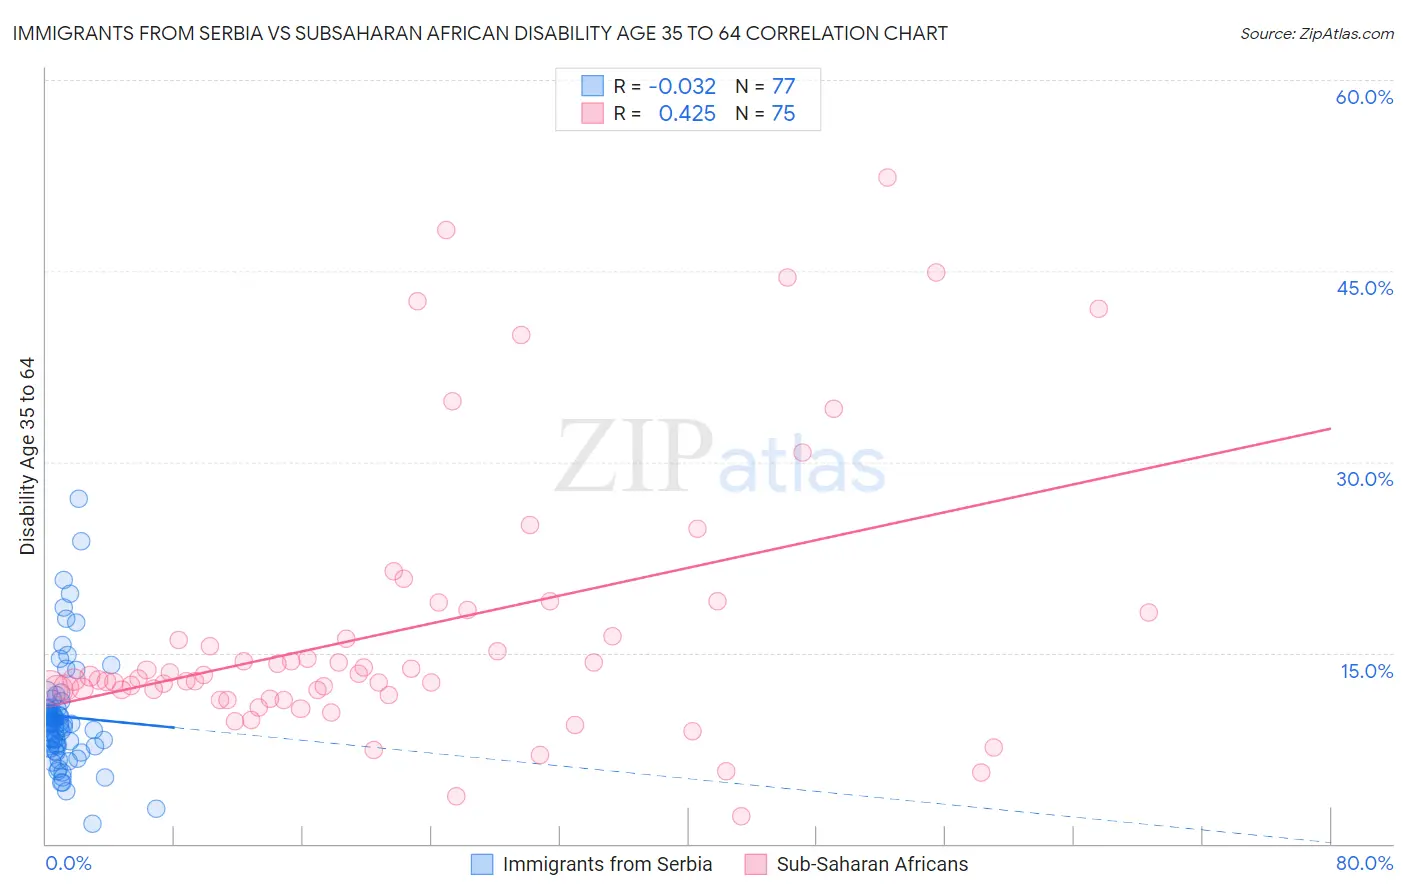 Immigrants from Serbia vs Subsaharan African Disability Age 35 to 64